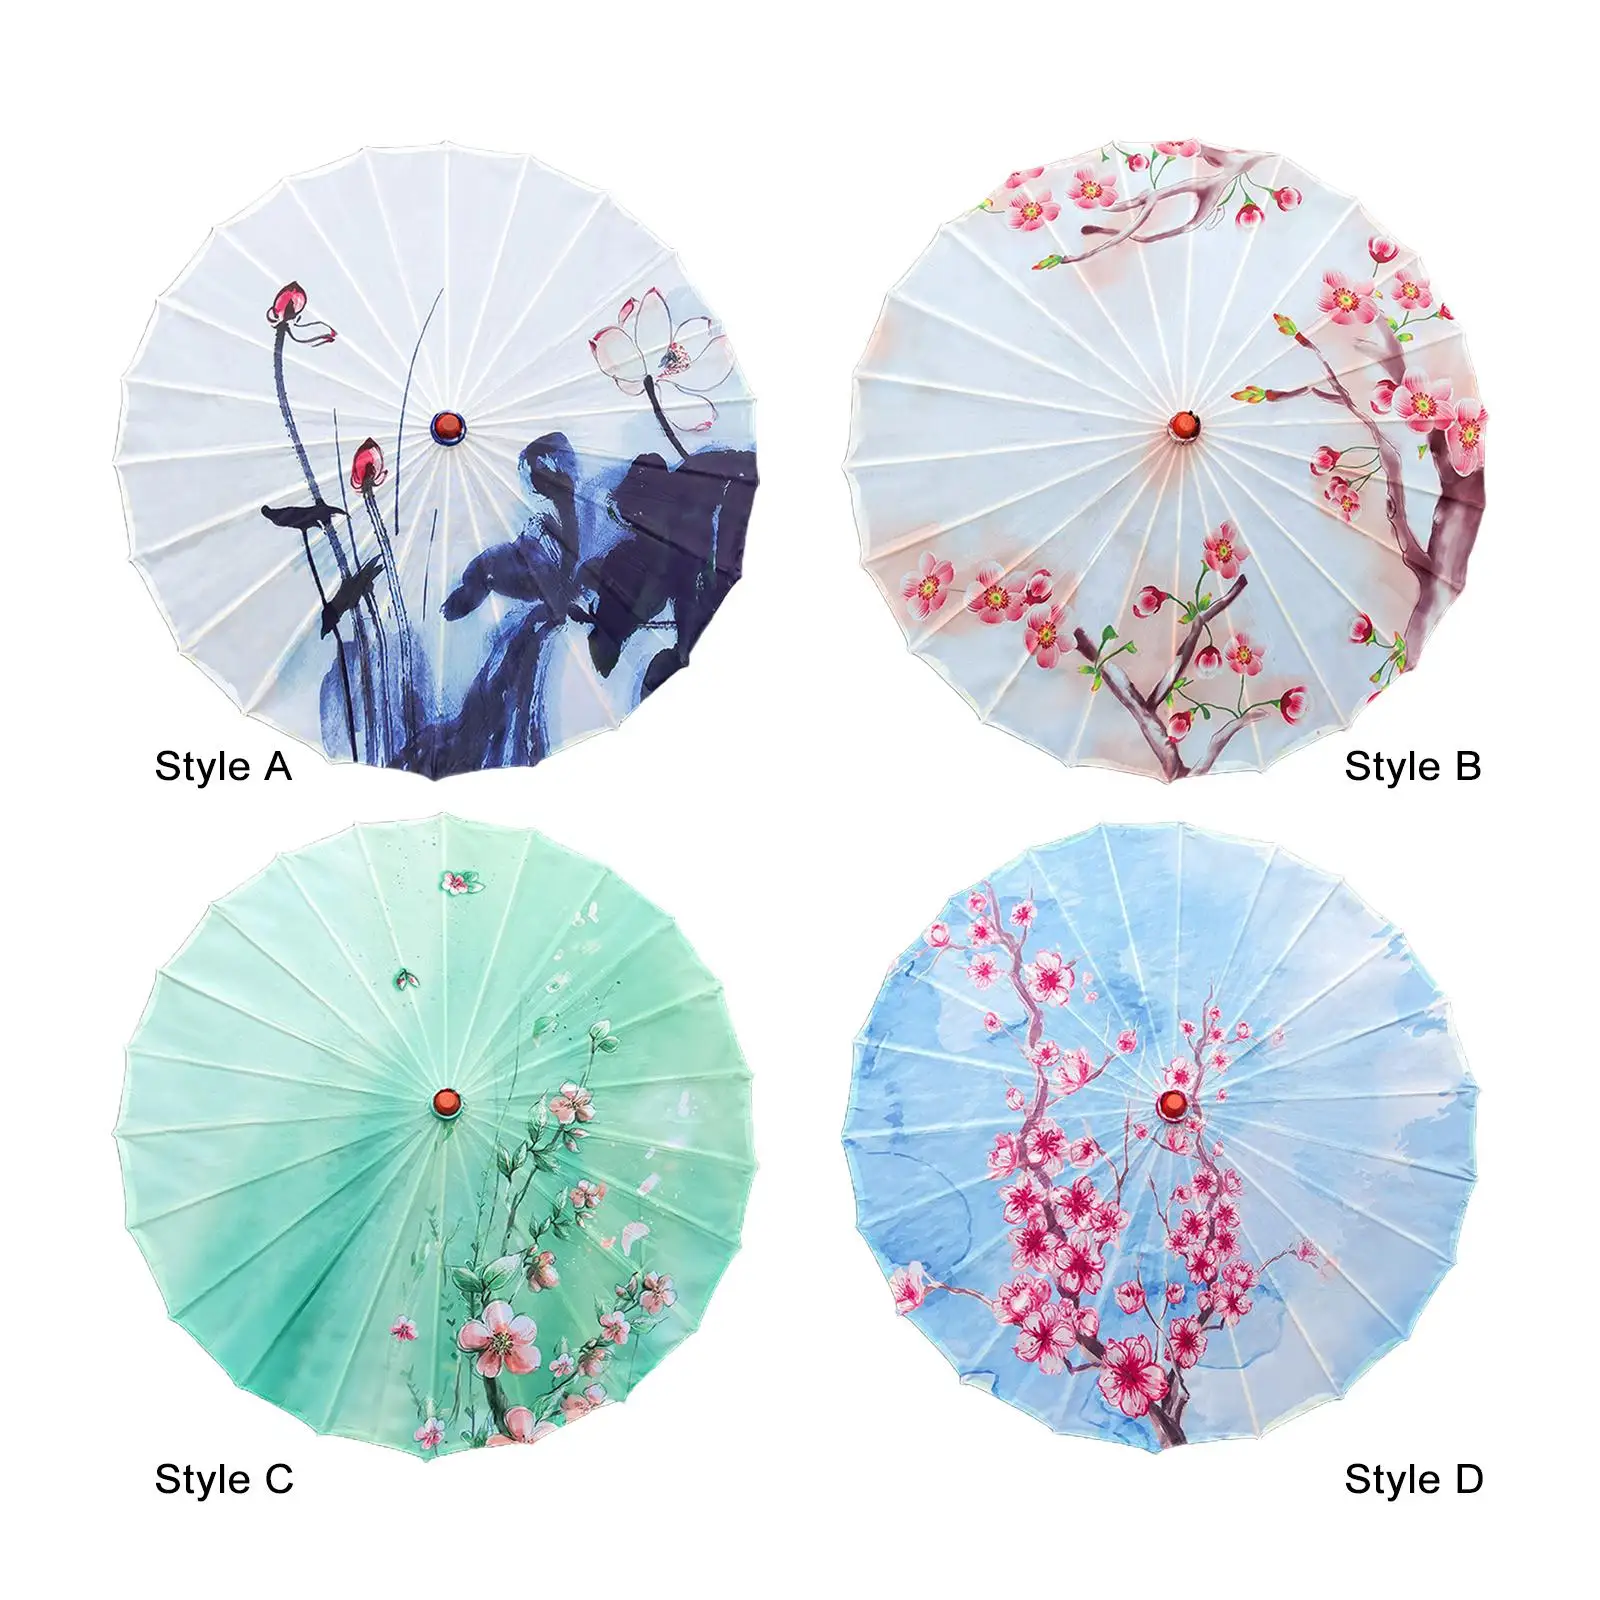 Ancient Dance Umbrella 32 inch Sunshade Rainproof Chinese Oiled Paper Umbrella for Costumes Decoration Events Wedding Party